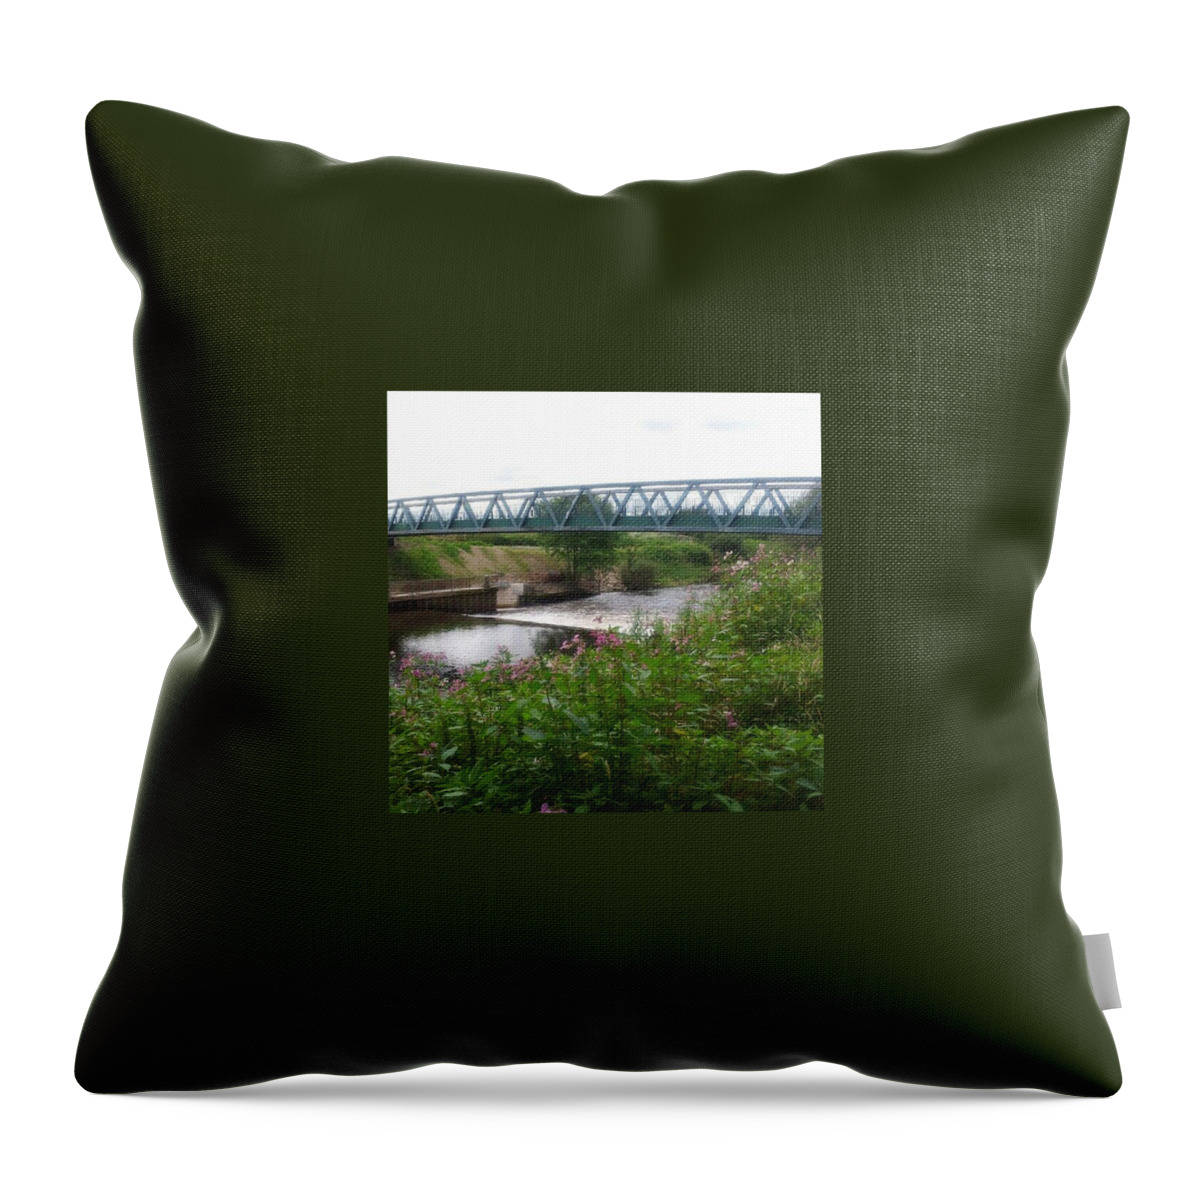  Throw Pillow featuring the photograph River Mersey Bridge by Abbie Shores